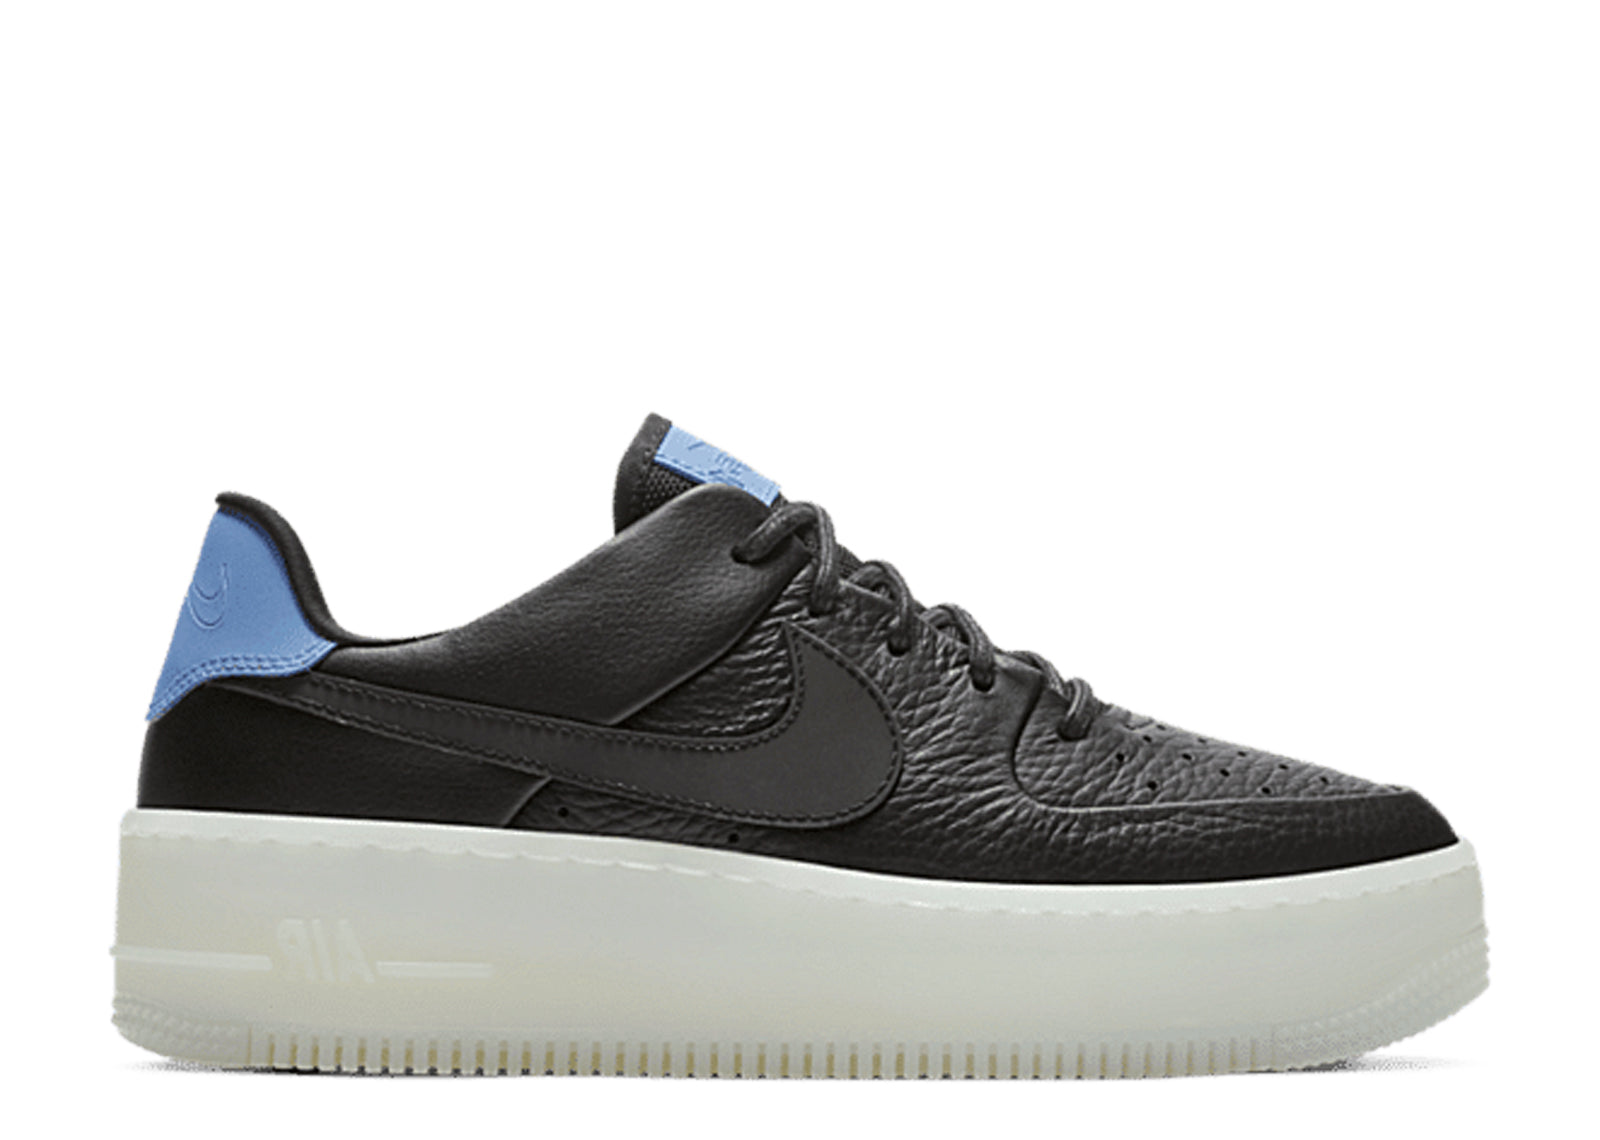 Second Chance - Nike Air Force 1 Sage Low Black/Glace - 37,5 | NEW